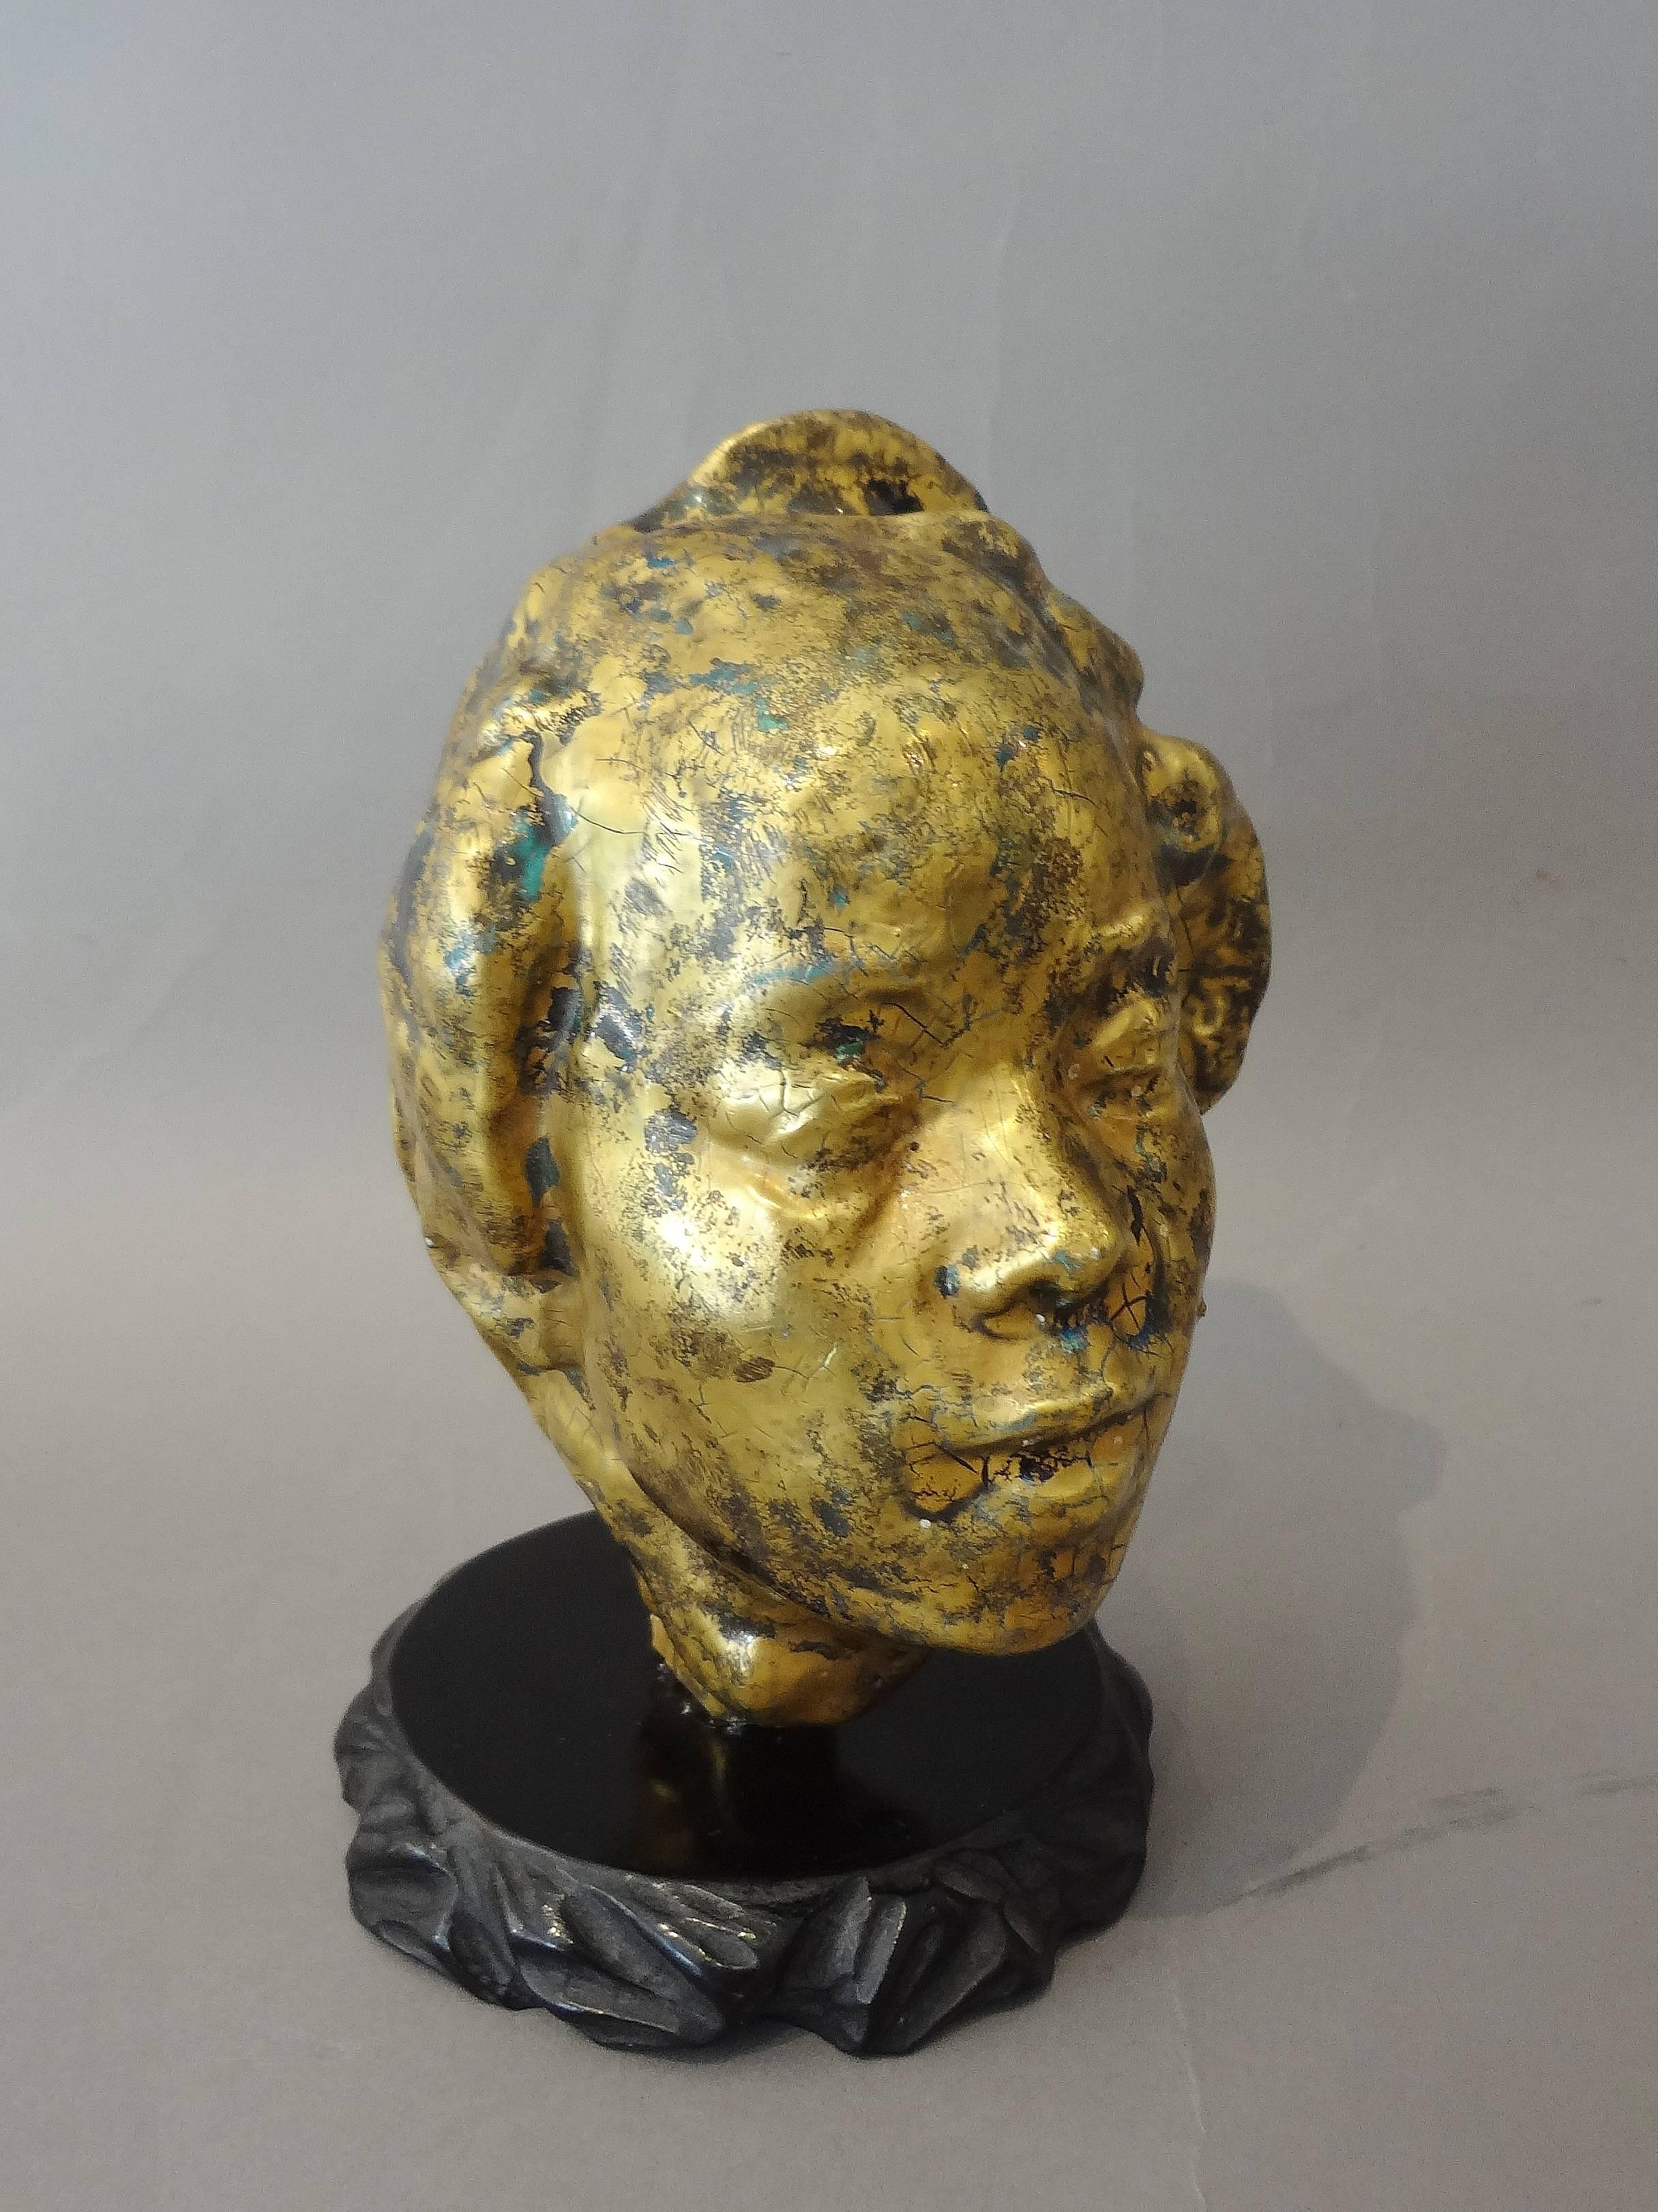 Exceptional ceramic woman’s head, 1930s, by Jean Mayodon (1893-1967)
called Hanako after Auguste Rodin.
Gilt and dark green enamelled ceramic. Unique piece.
Black circular carved wood base.
Measures: Ceramic height 14.5 cm.
 
Moving homage to